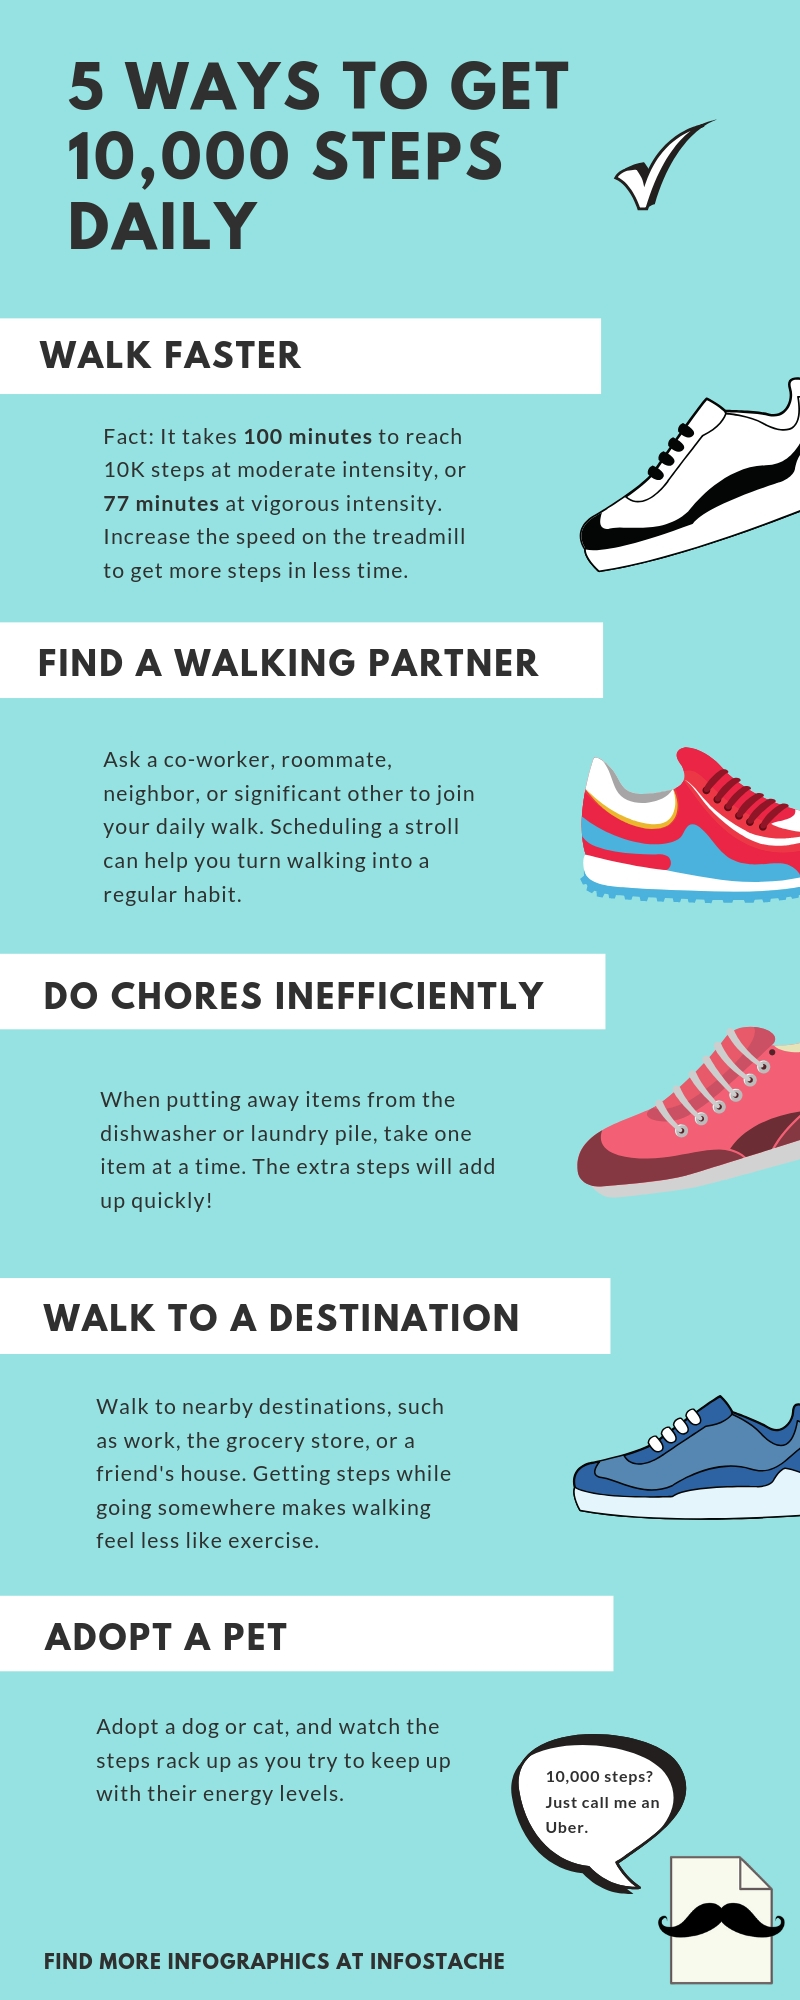 5-ways-to-get-10-000-steps-daily-infographic-infostache